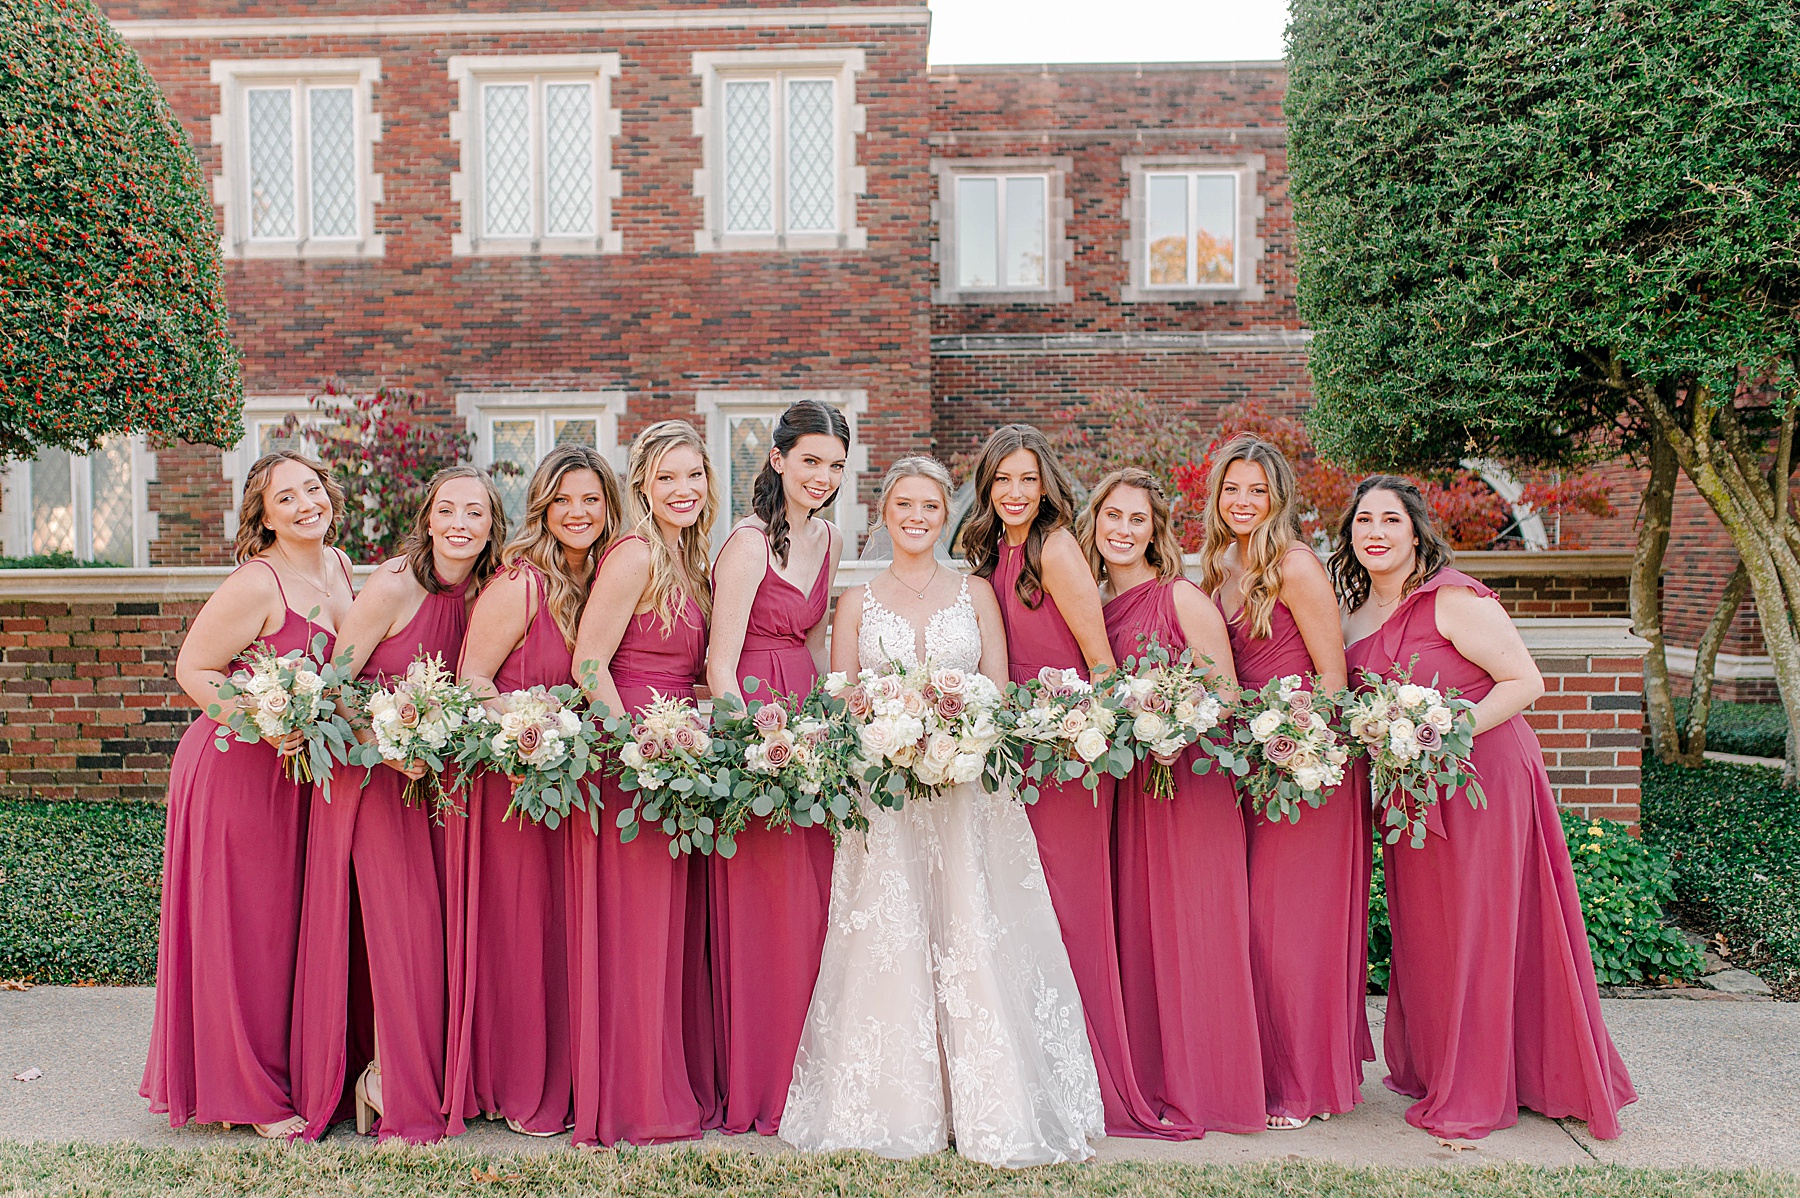 Bridal party in front of church